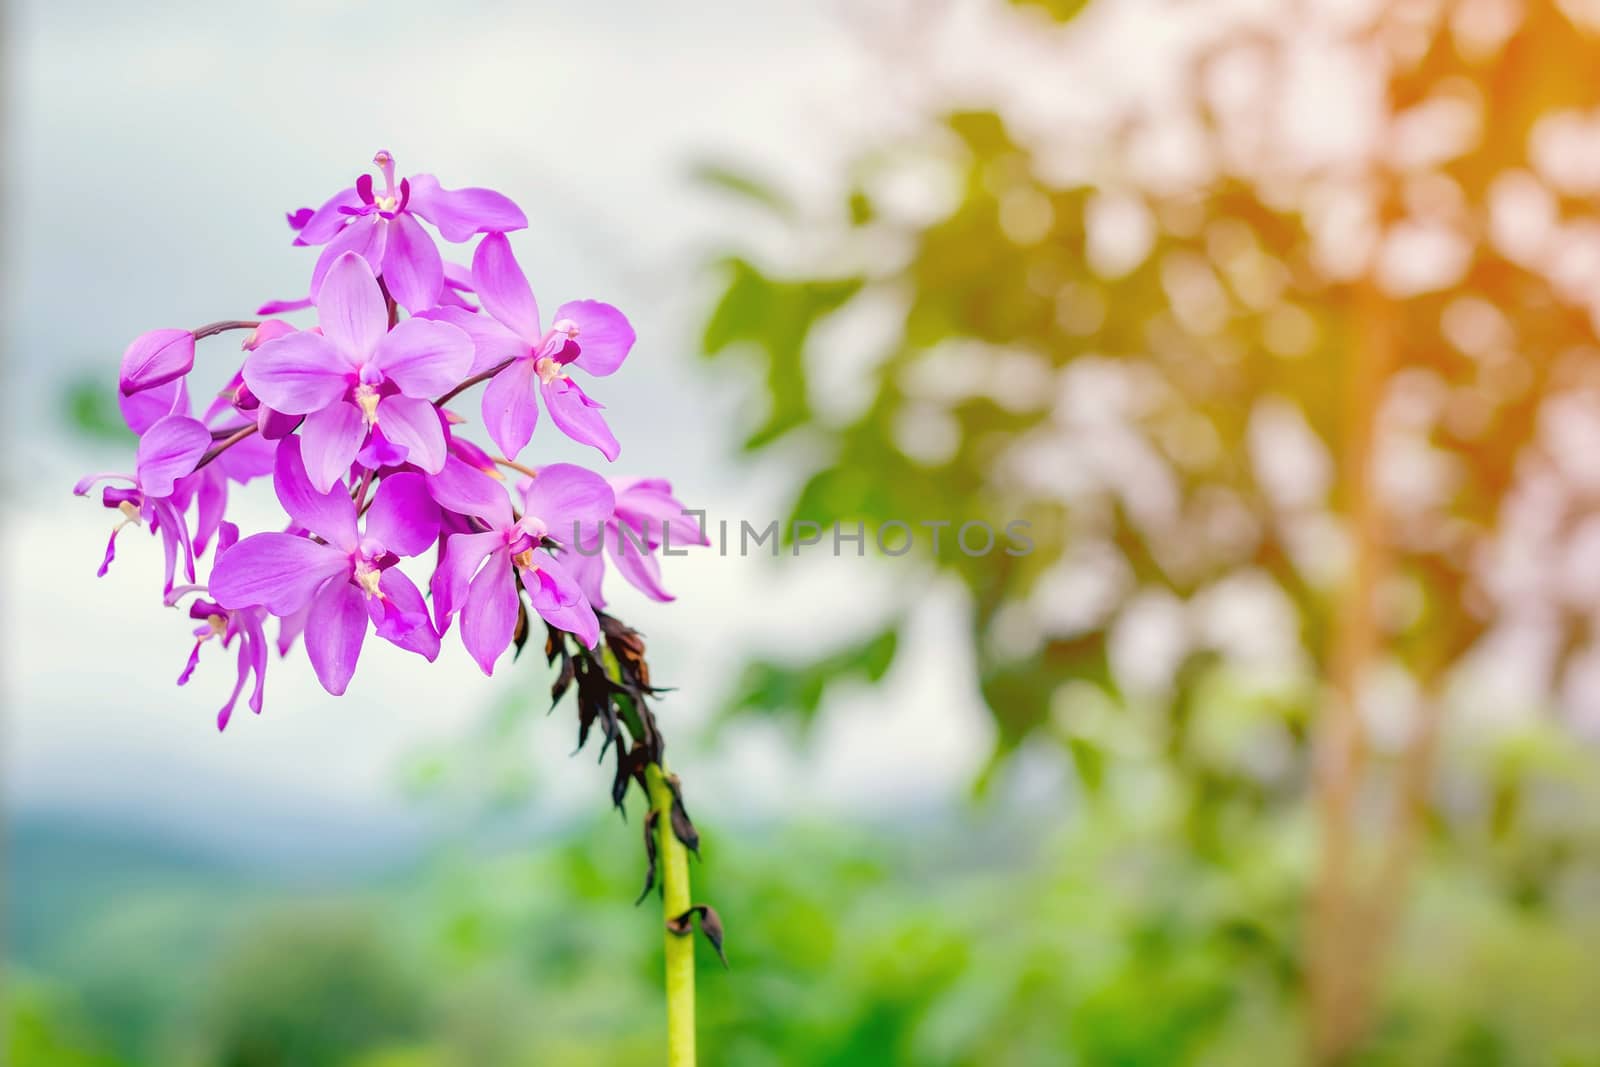 Beautiful purple color of orchid flowers in the garden.